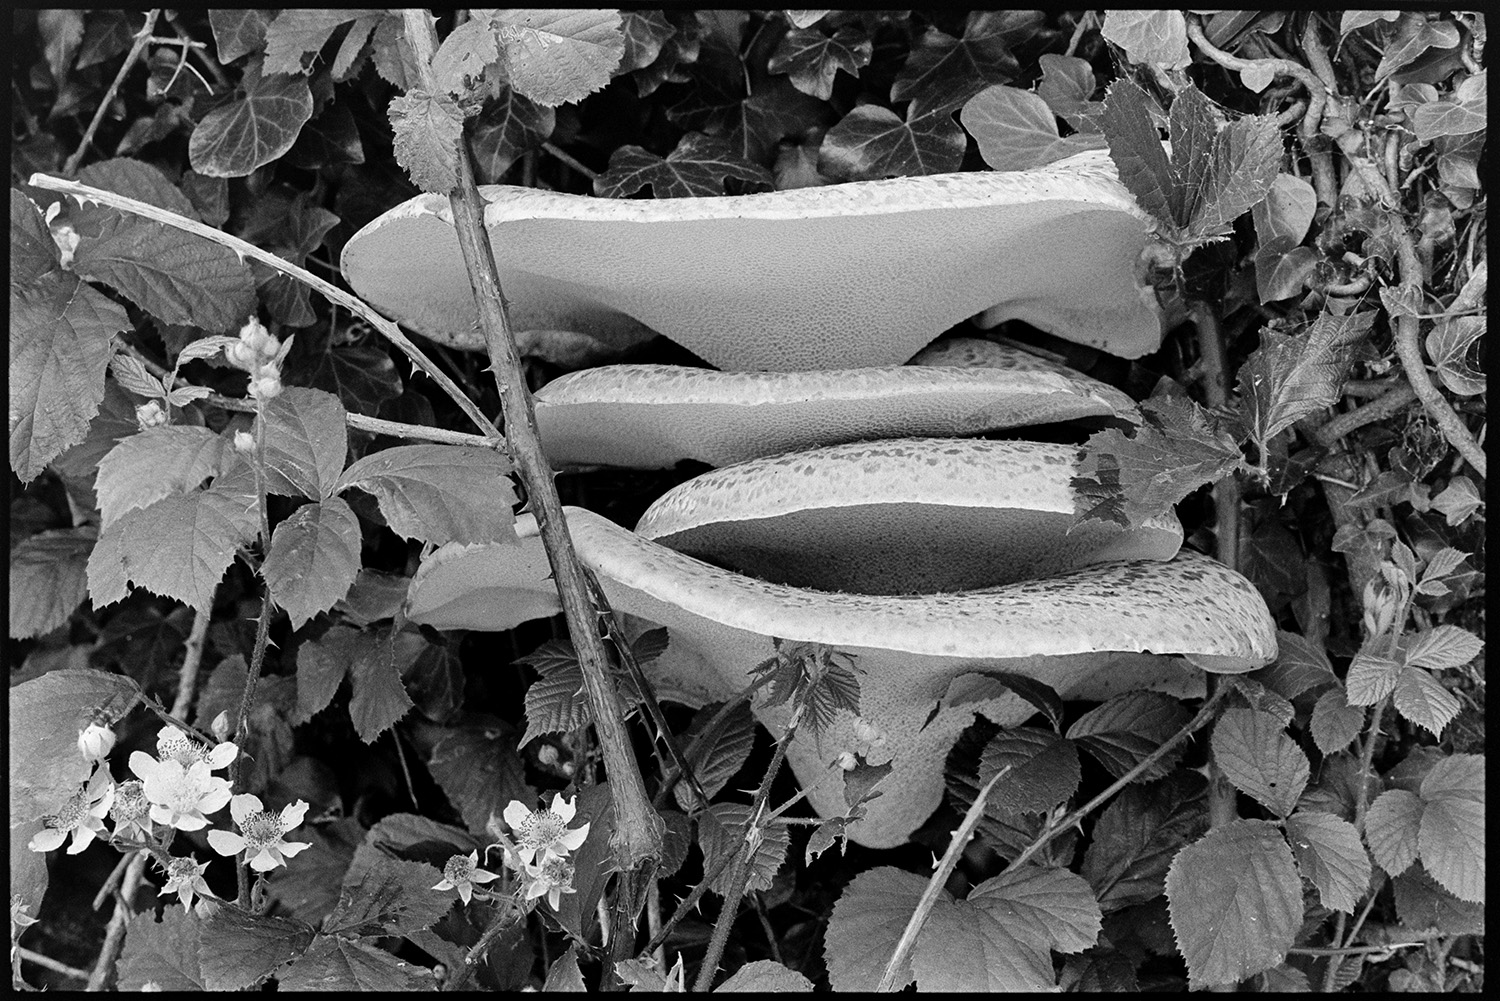 Large fungus in hedge, fungi. 
[A large mushroom or fungi in a hedge with brambles.]